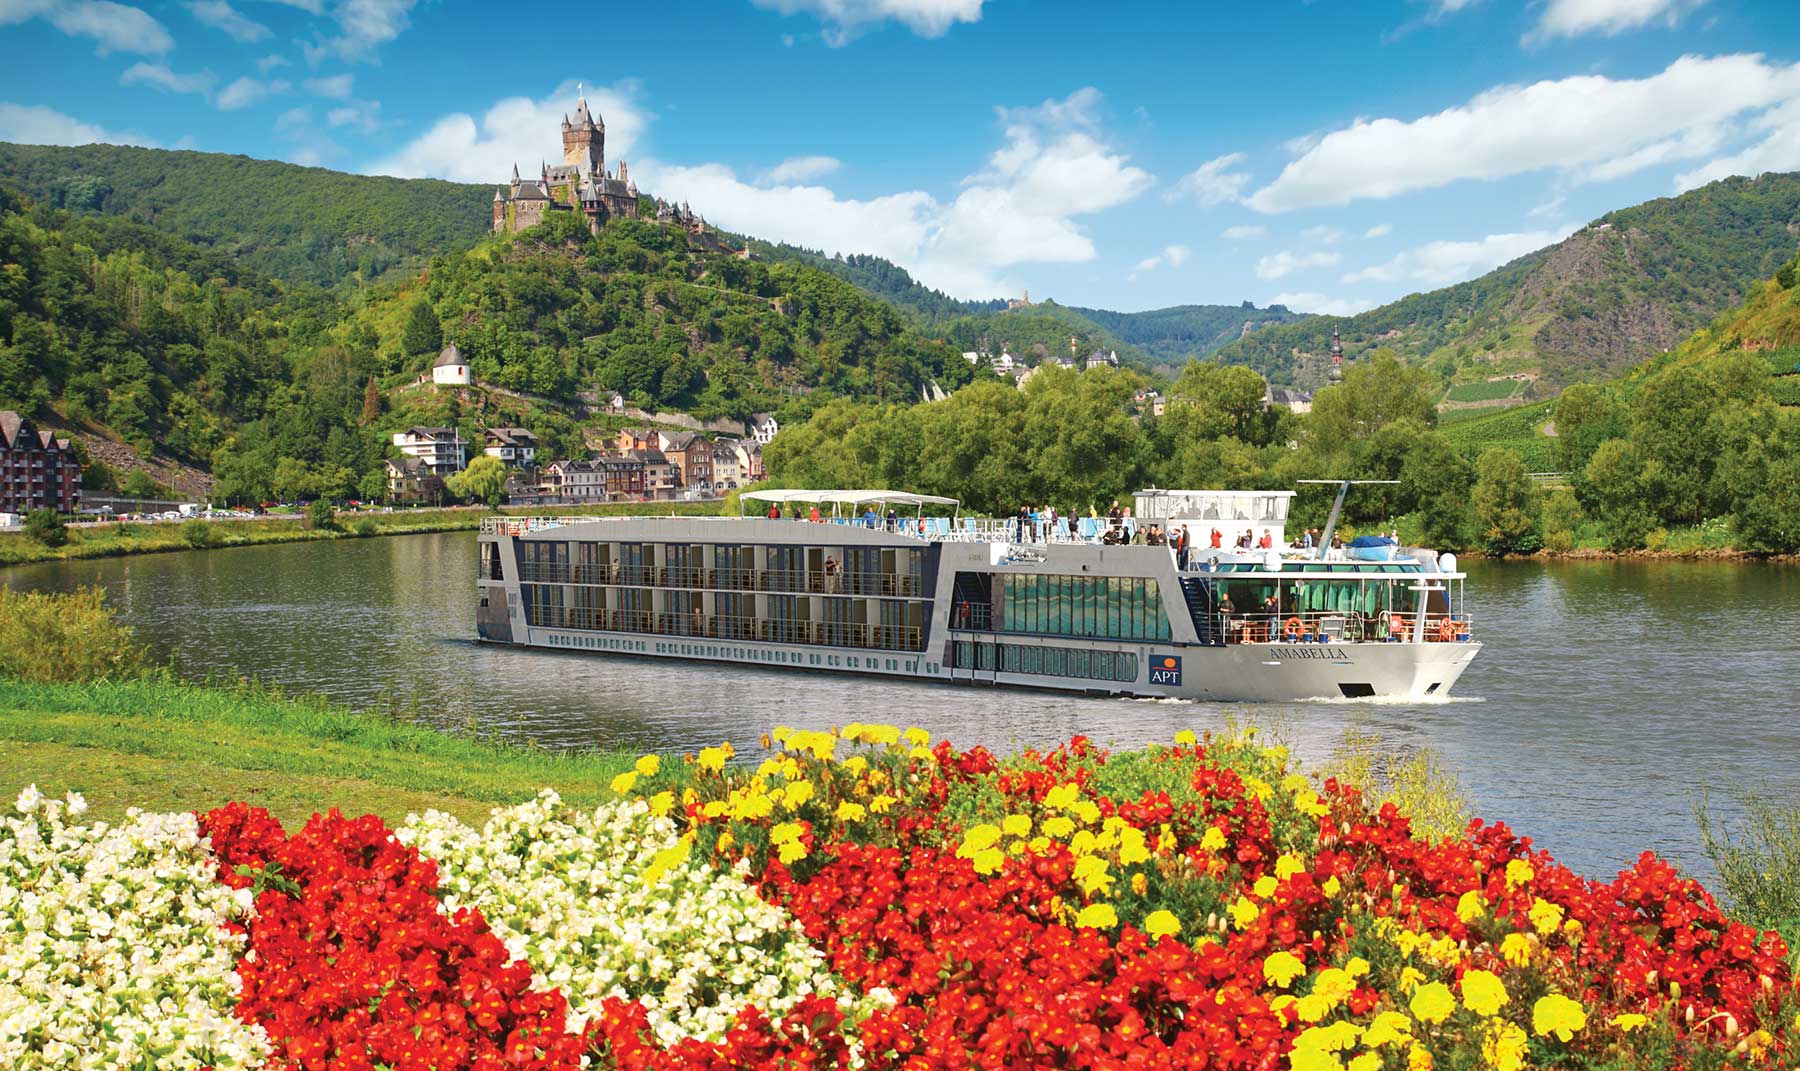 First timers guide to river cruising